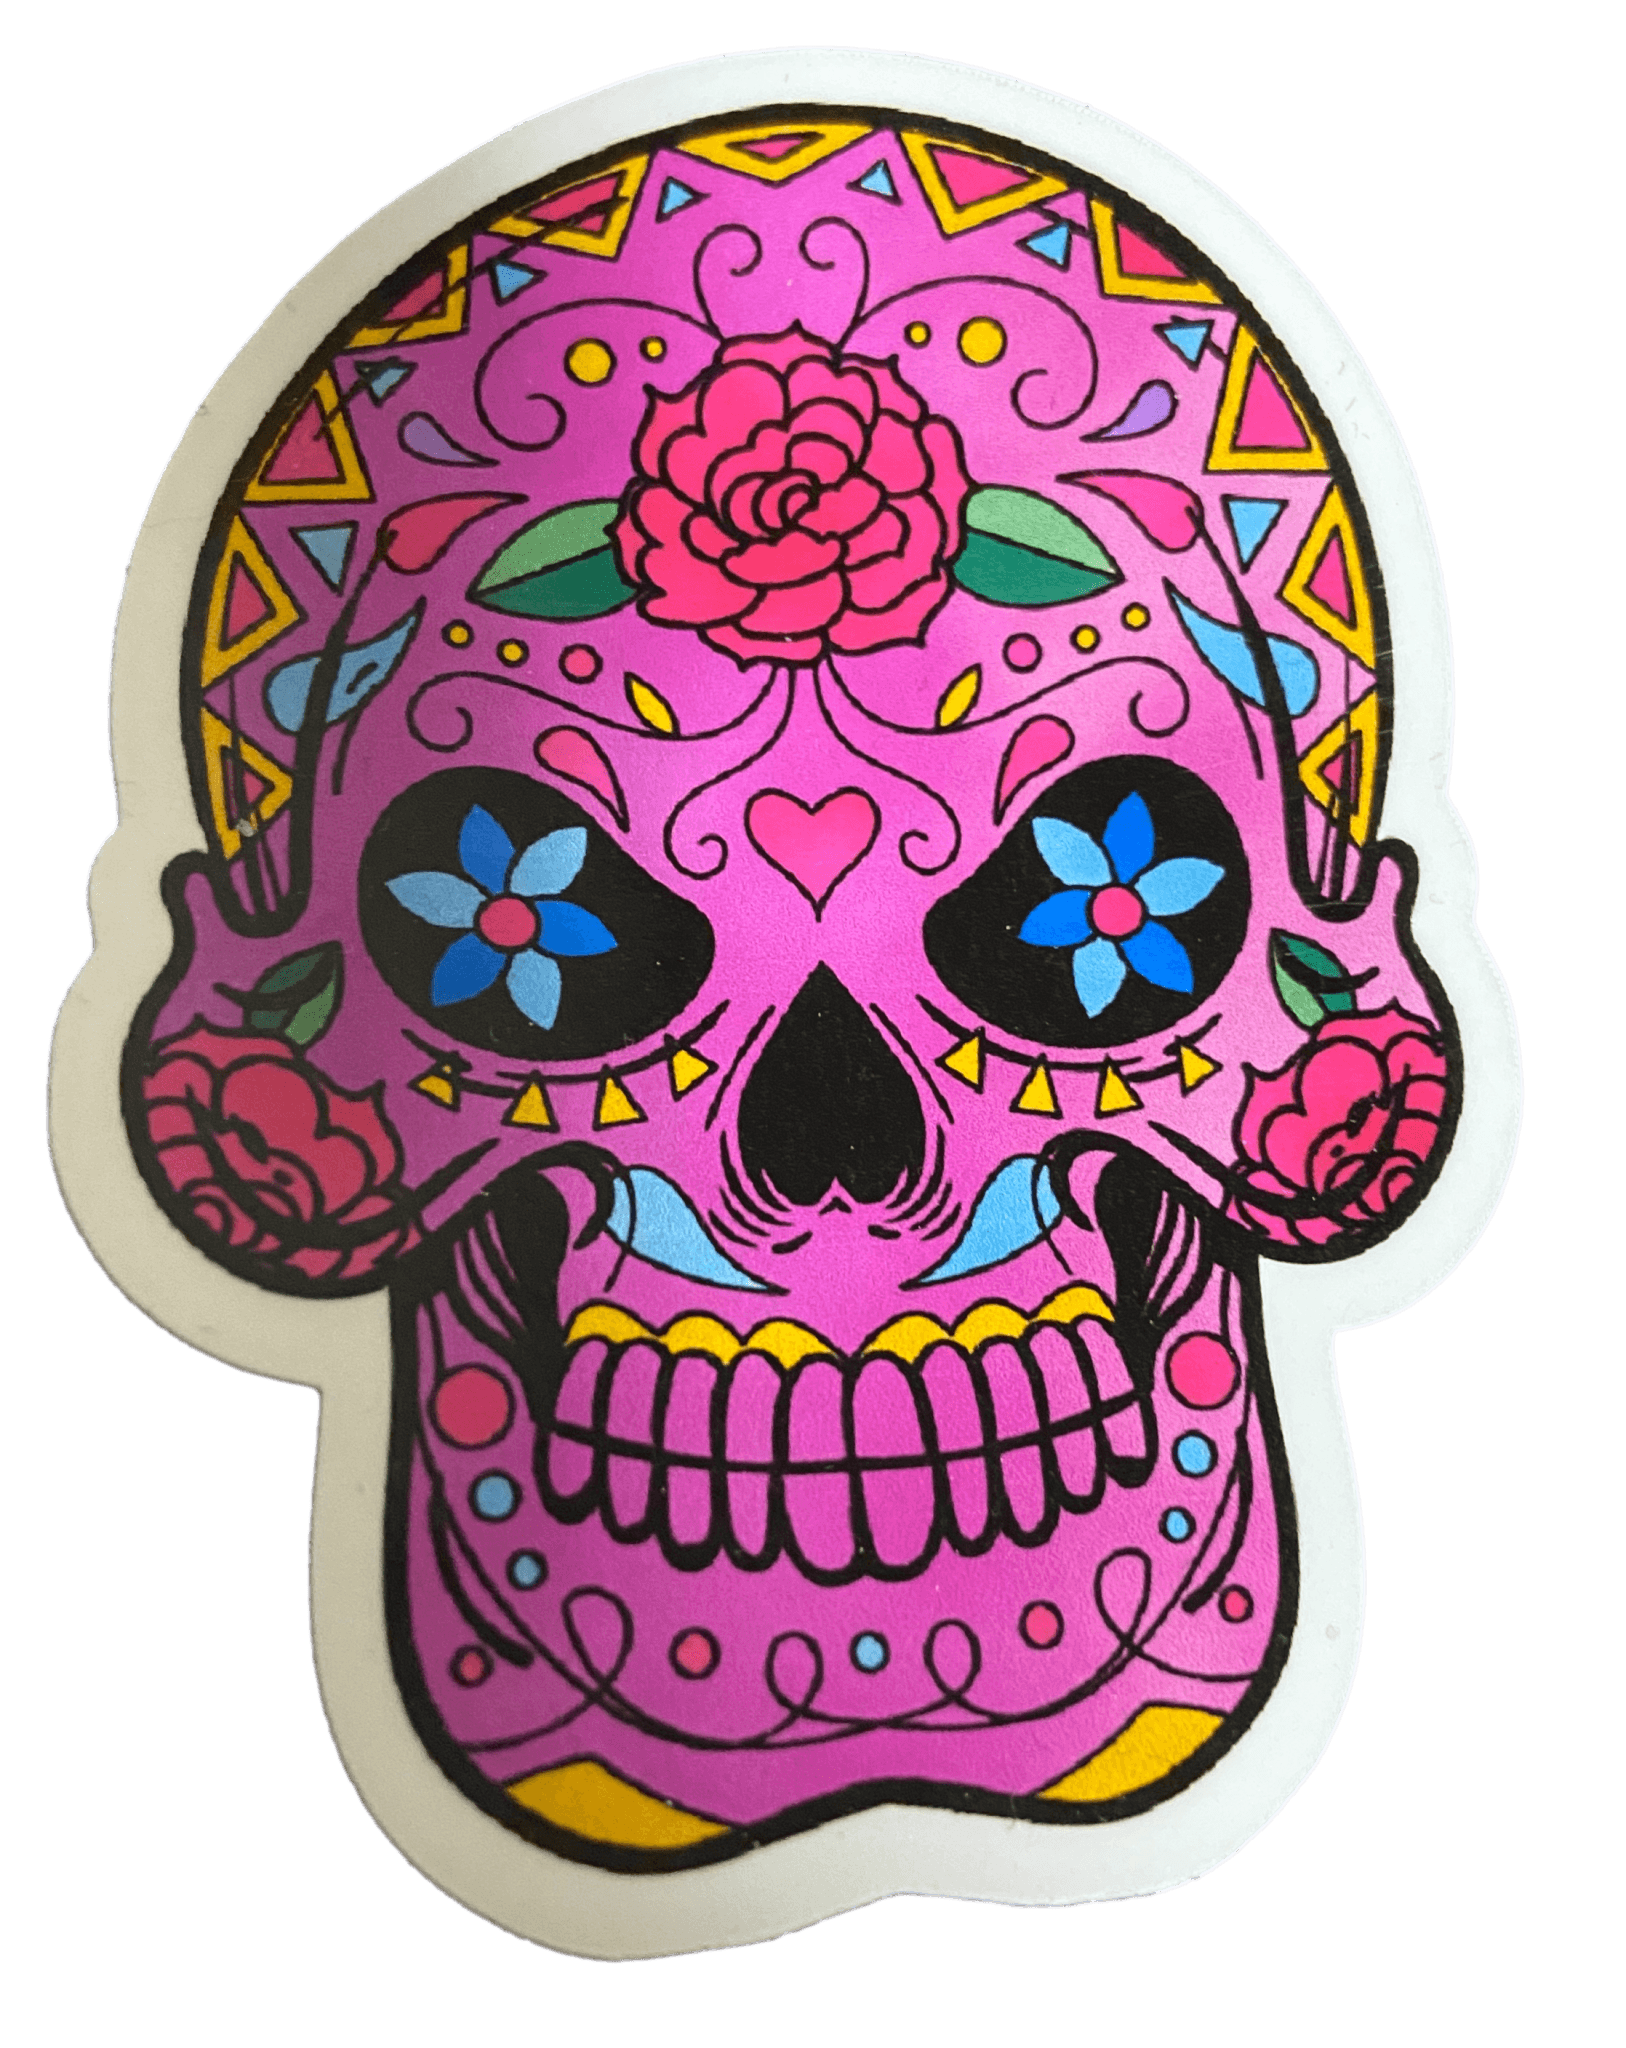 Day of the Dead 3 in. Stickers High-Quality PVC Vinyl Decorative Water-Resistant Glossy UV Resistant Skulls - Ysleta Mission Gift Shop- VOTED El Paso's Best Gift Shop